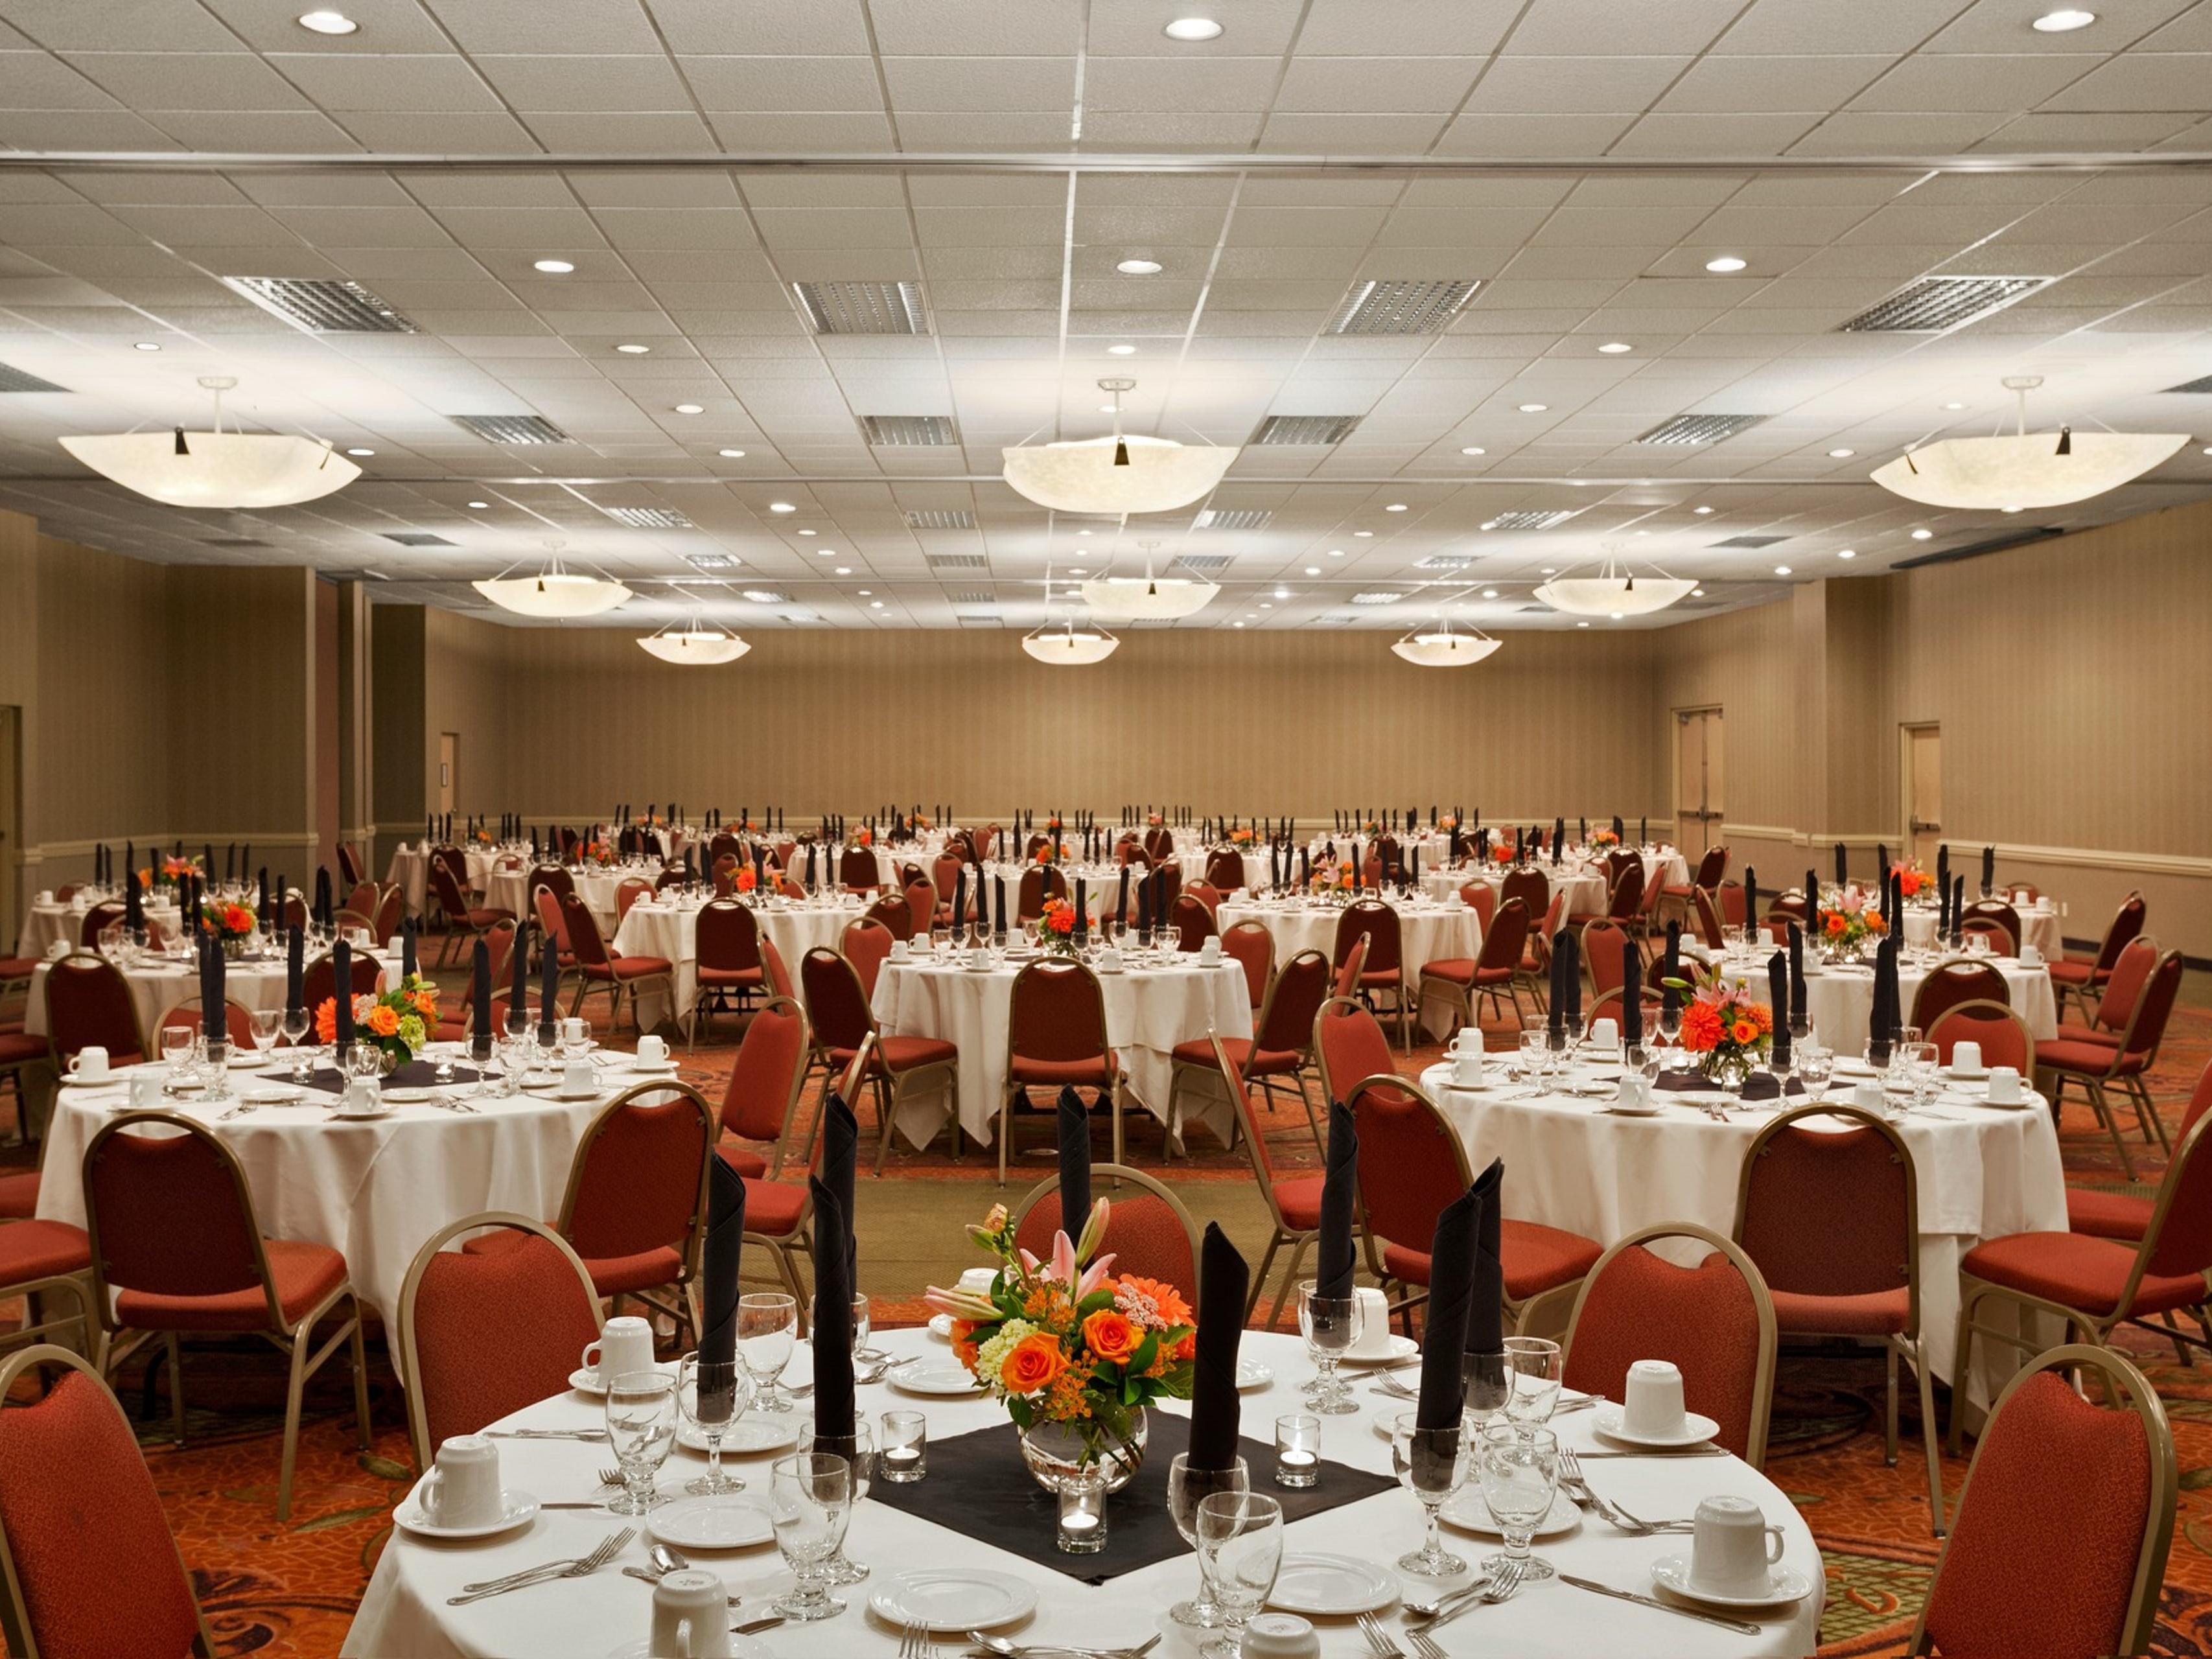 We make it easy to plan a seamless and successful event. Choose from 9 adaptable spaces, including 1 elegant ballroom, a dedicated boardroom, and a 15,500 sq ft conference center. We ensure the perfect backdrop for groups from 10 to 1,000 people. Enjoy working with our professional planners. We look forward to sharing our hospitality with you.